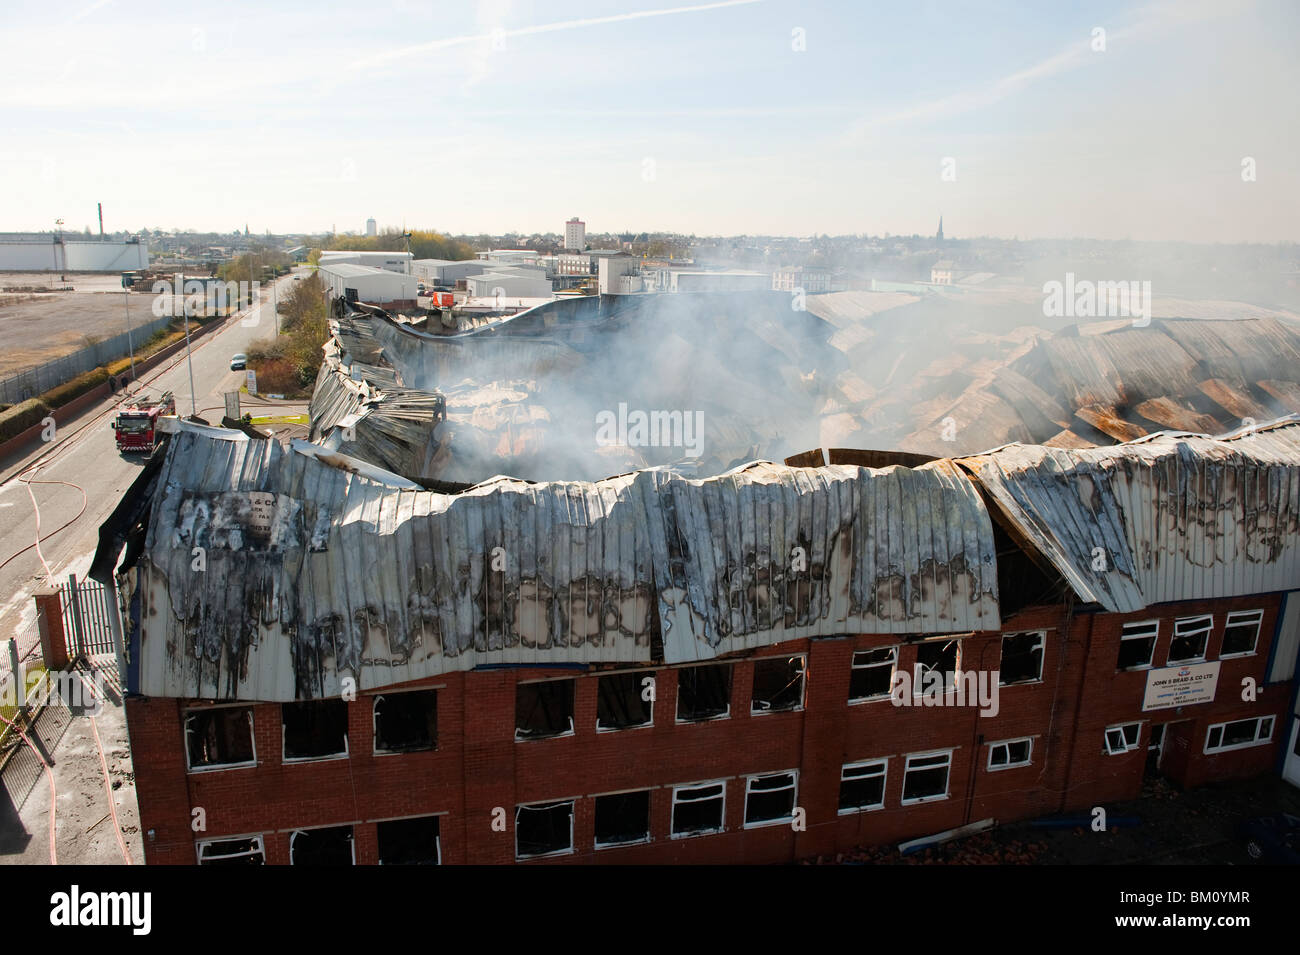 Large factory and warehouse collapsed and smoldering following major fire night before - Fire Brigade damping down Stock Photo